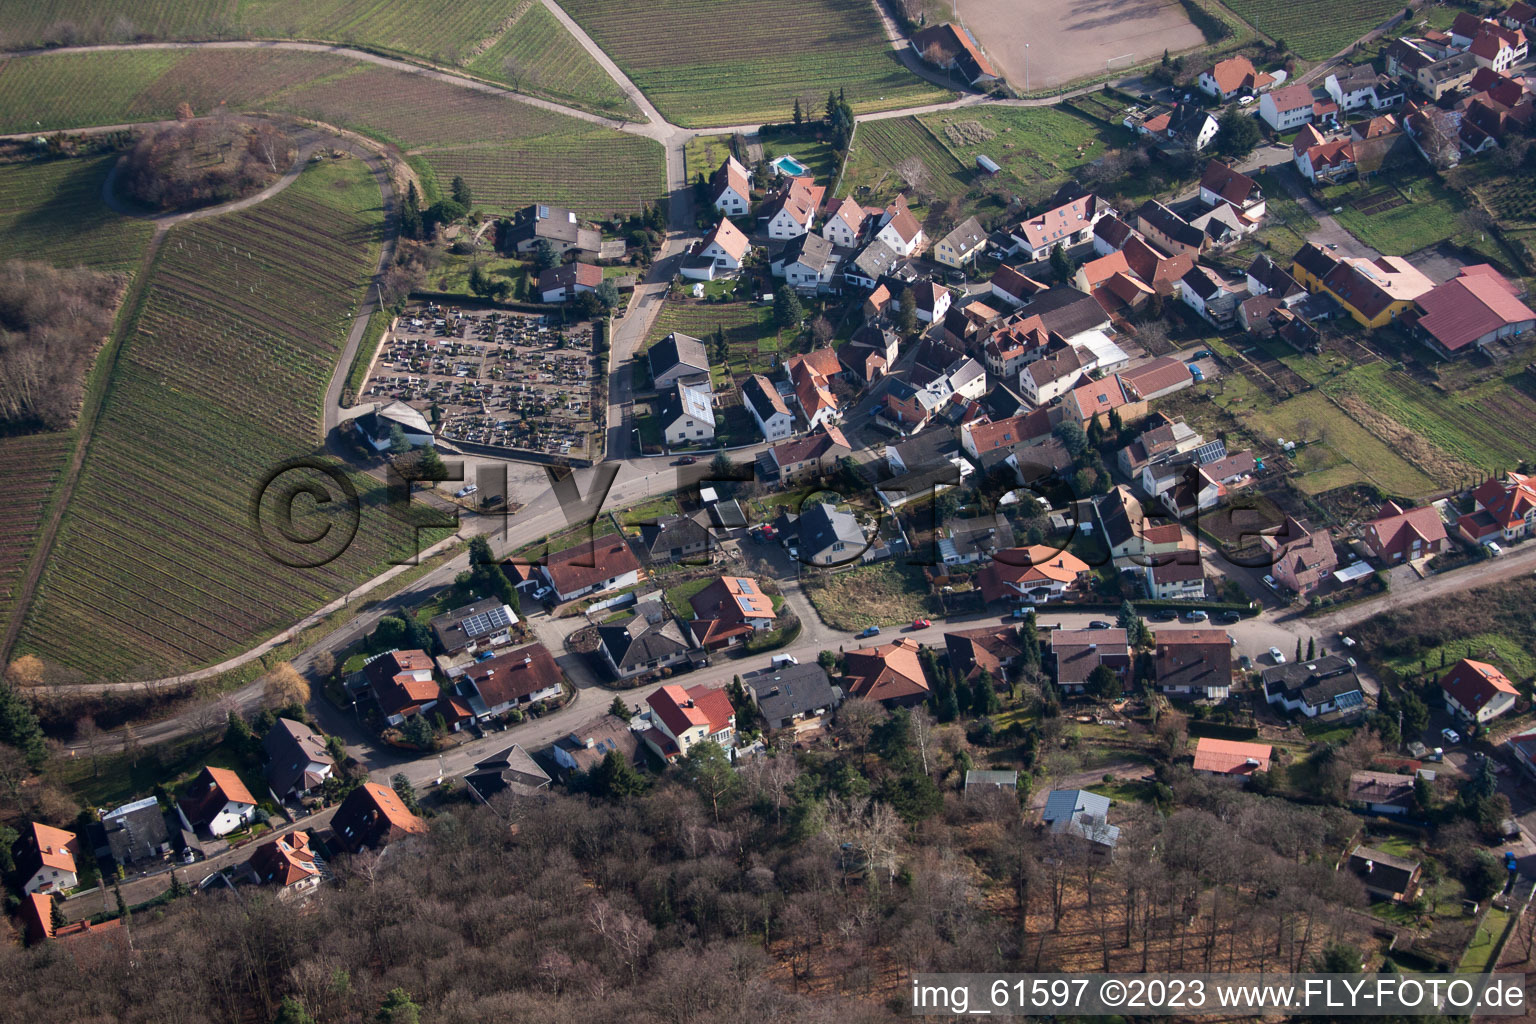 Drone image of Burrweiler in the state Rhineland-Palatinate, Germany